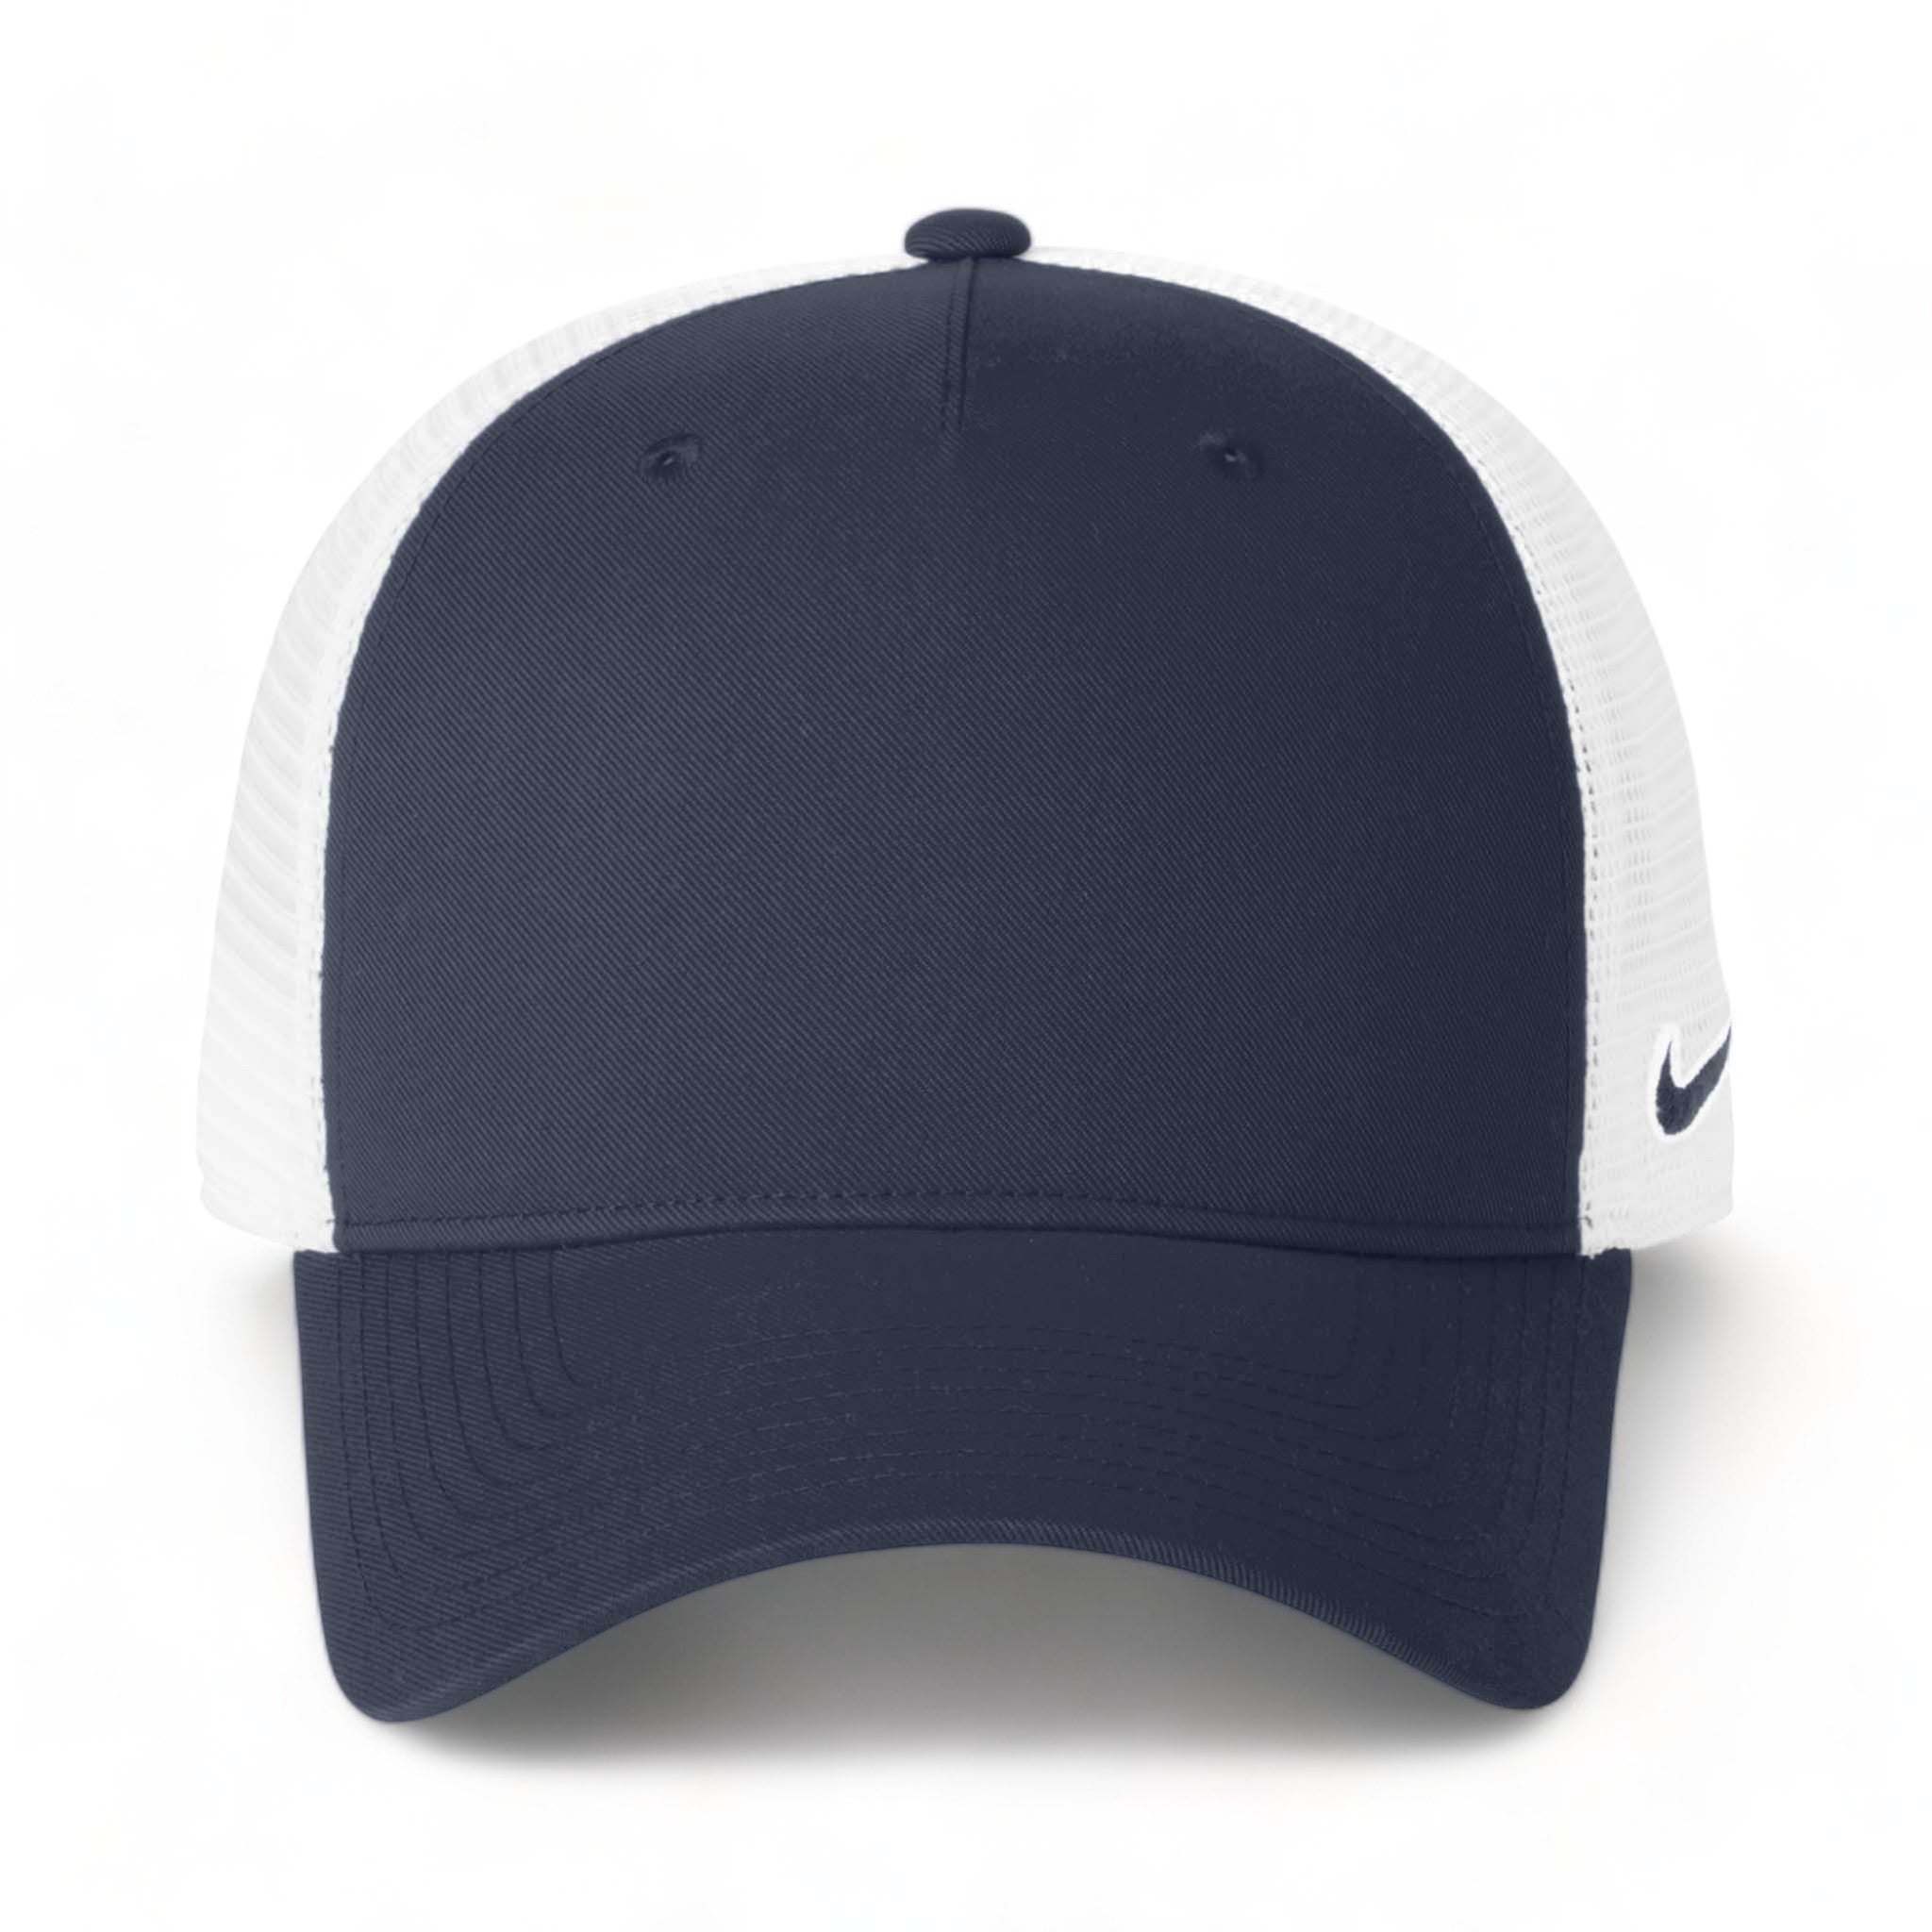 Front view of Nike NKFN9893 custom hat in navy and white